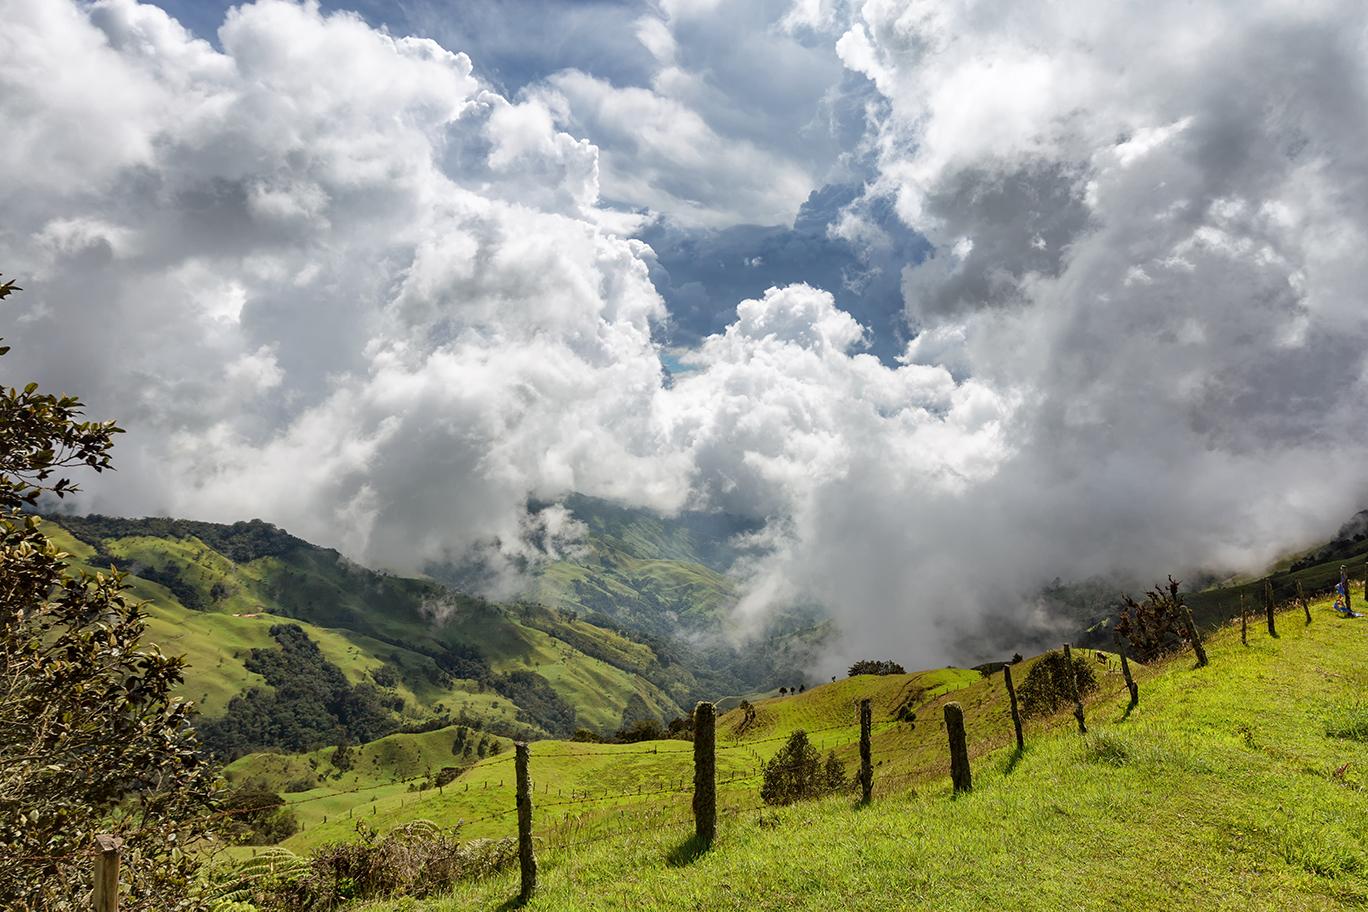 Experience Colombia’s beautiful mountainous landscapes with Colombia guided tours